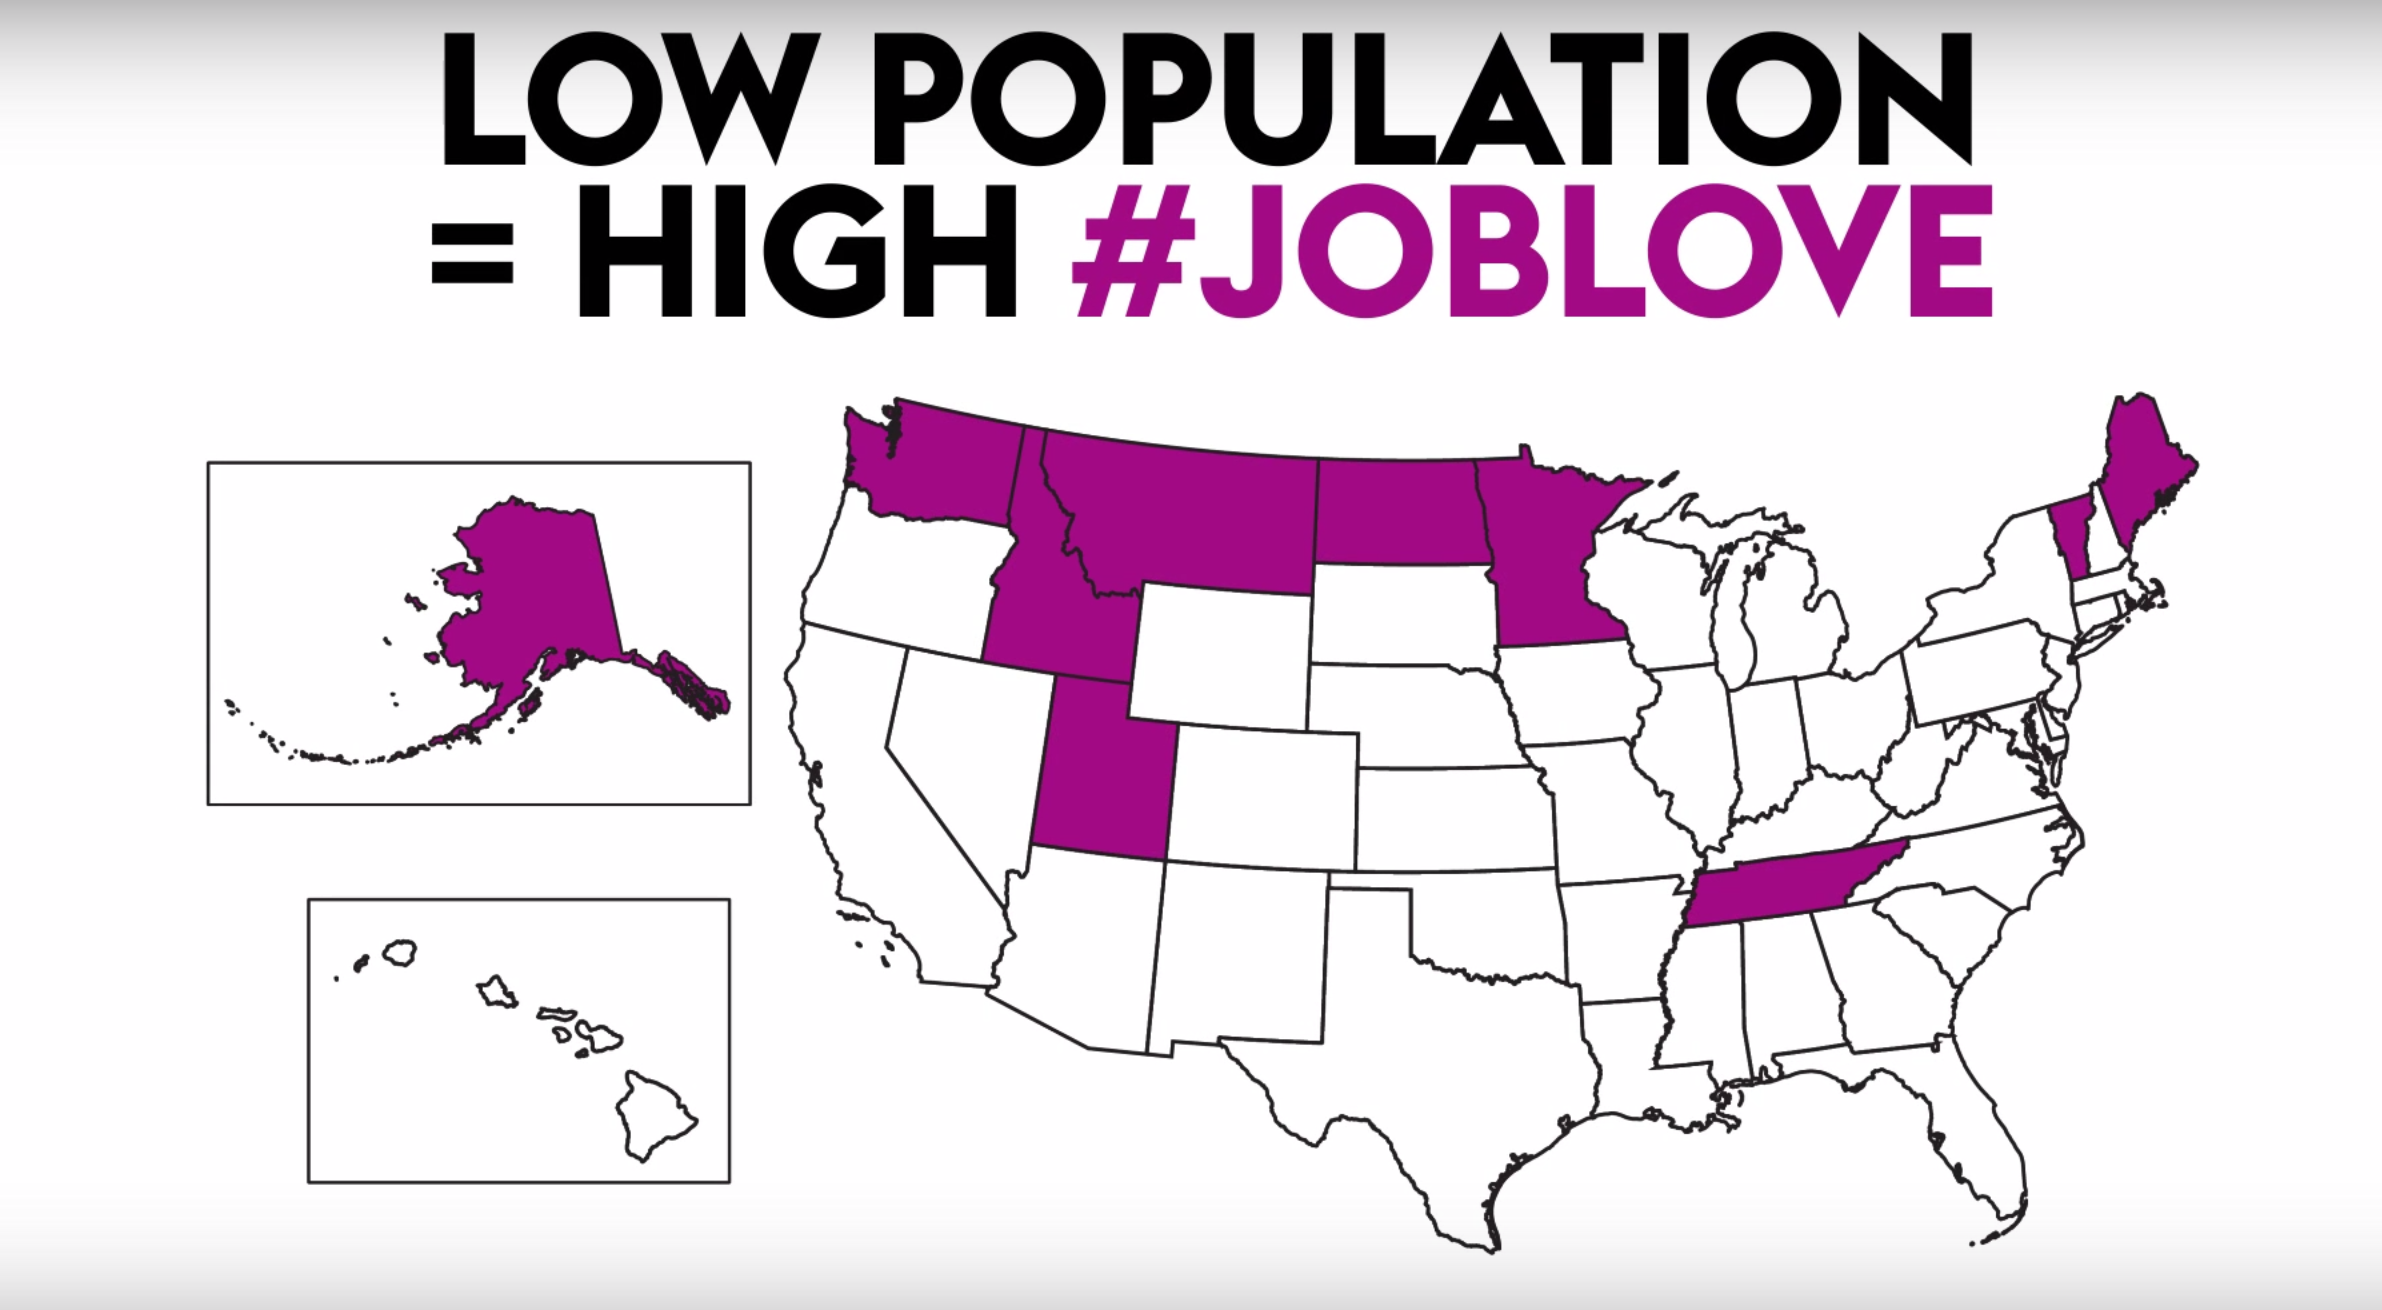 Find a job you love—it’s easier than you think